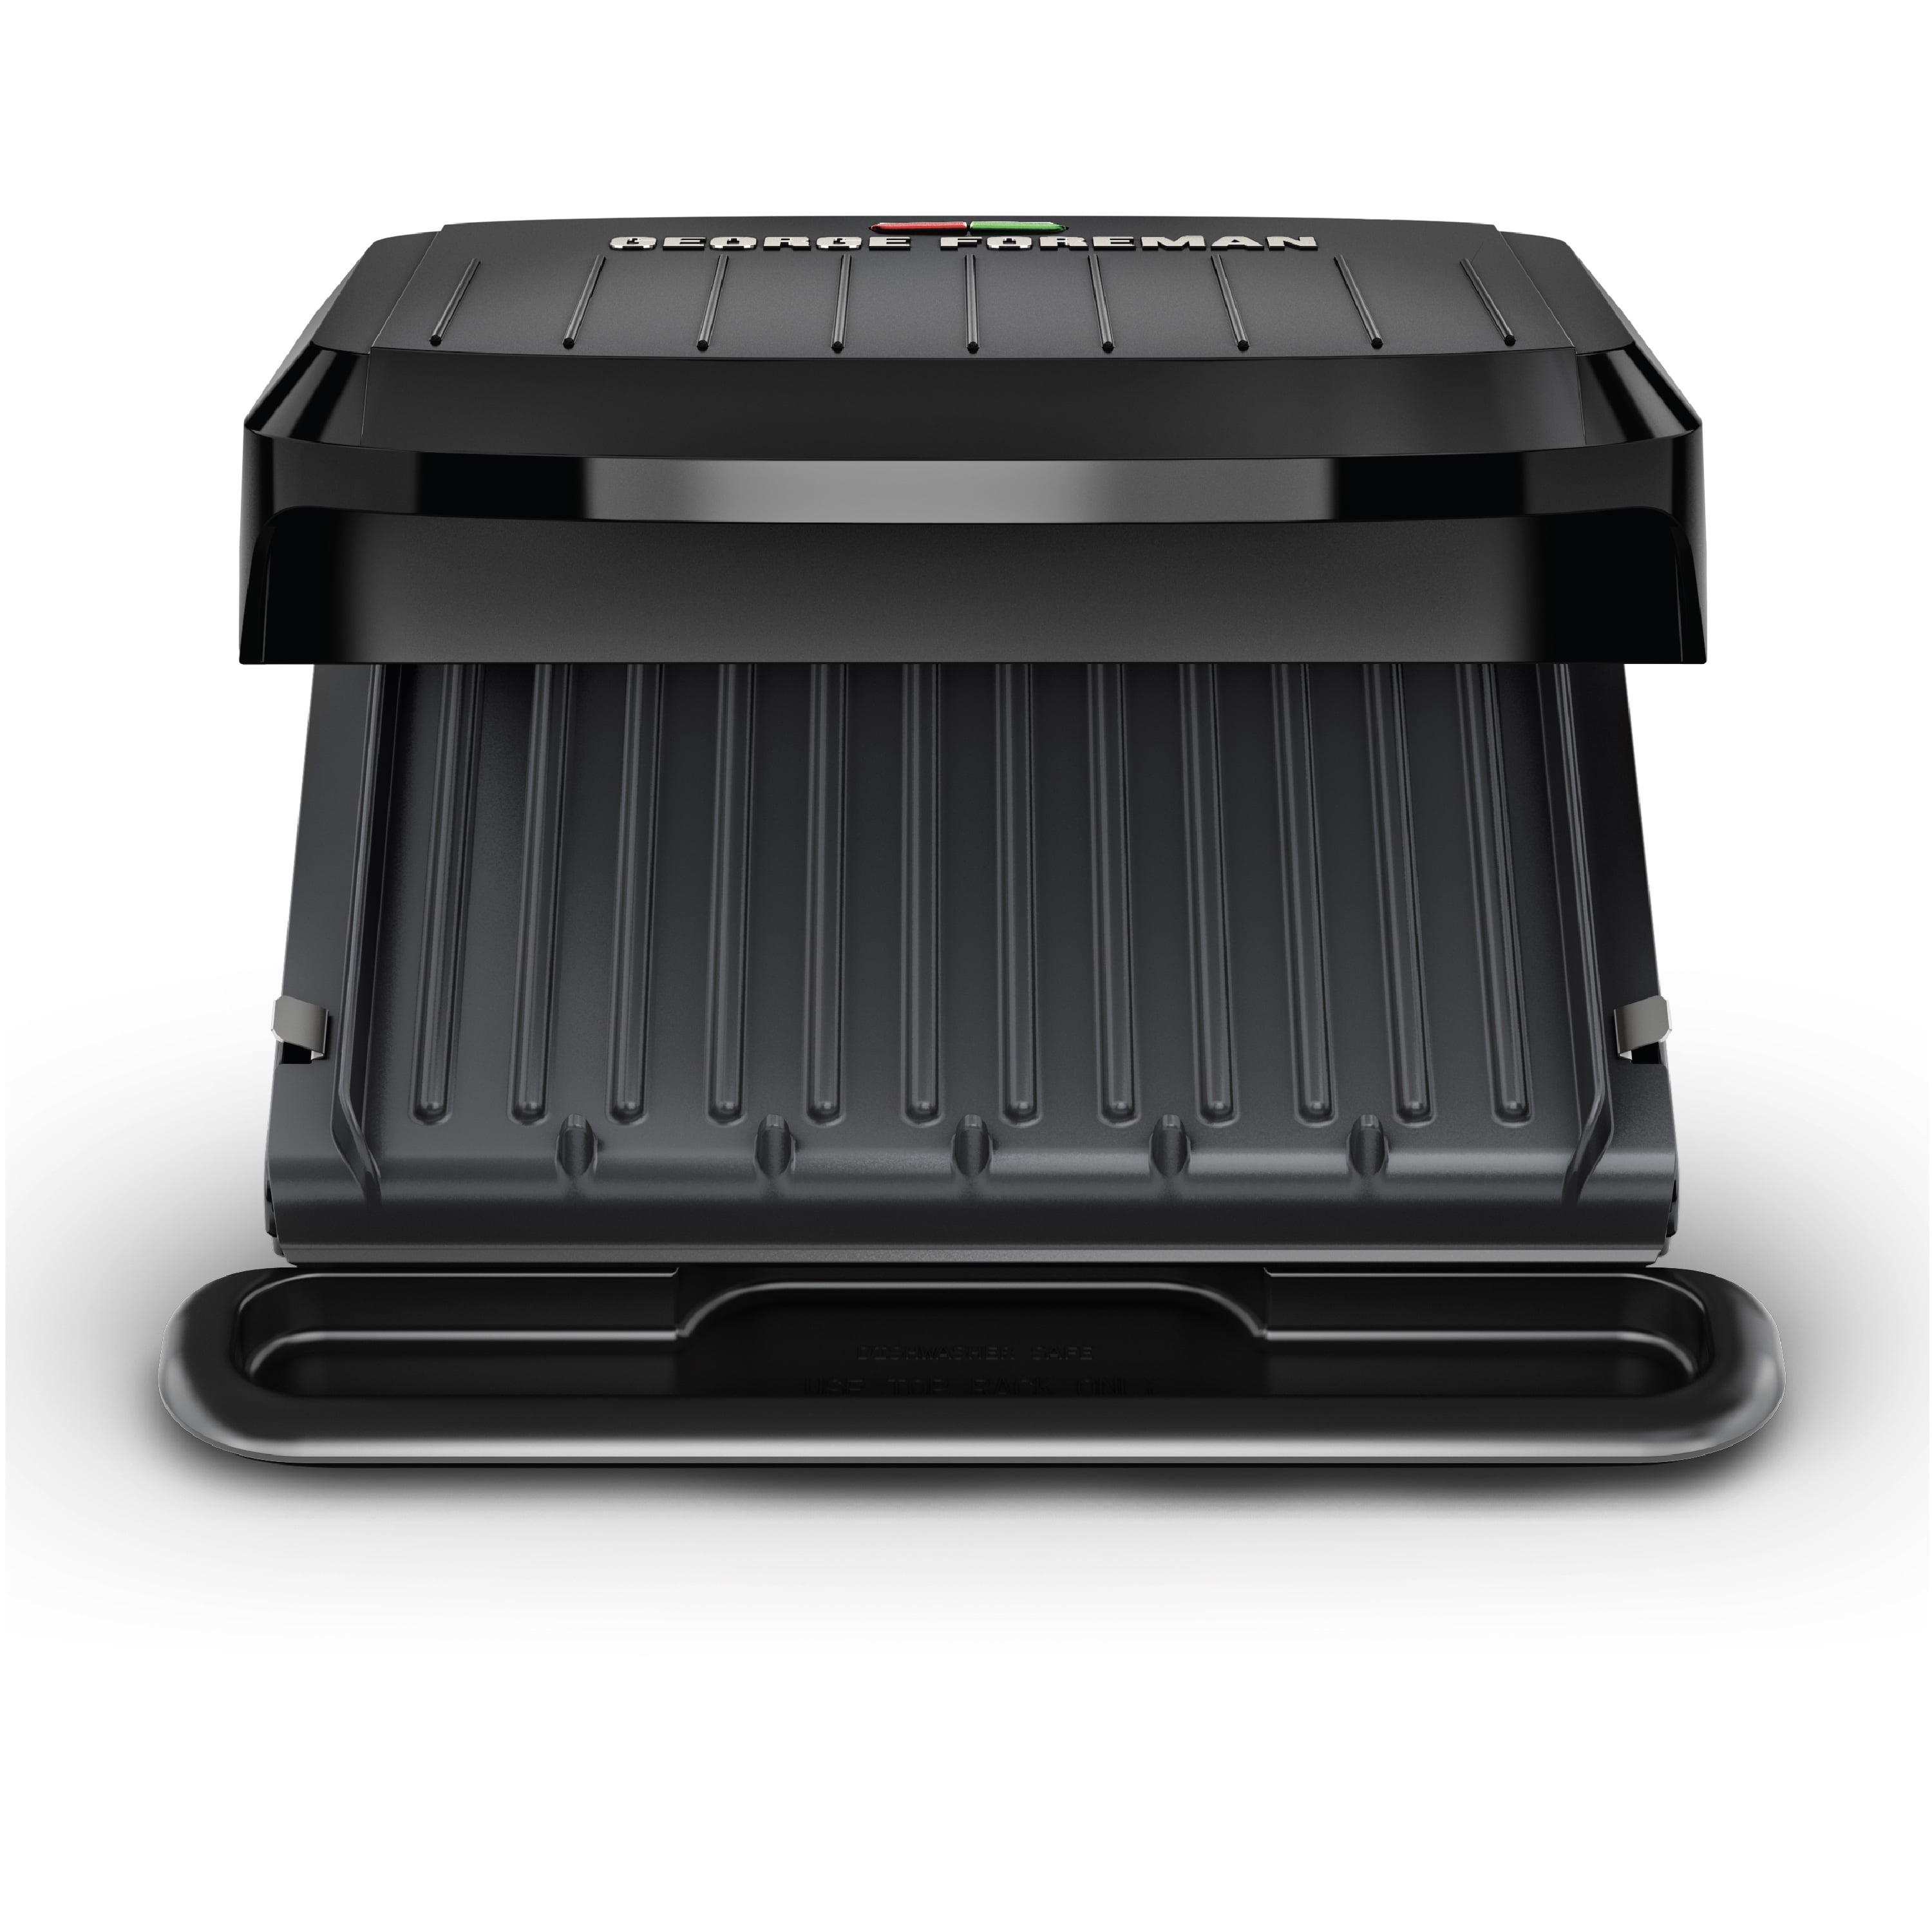 George Foreman 4-Serving Removable Plate Grill and Panini, Black, GRP1065B - 2